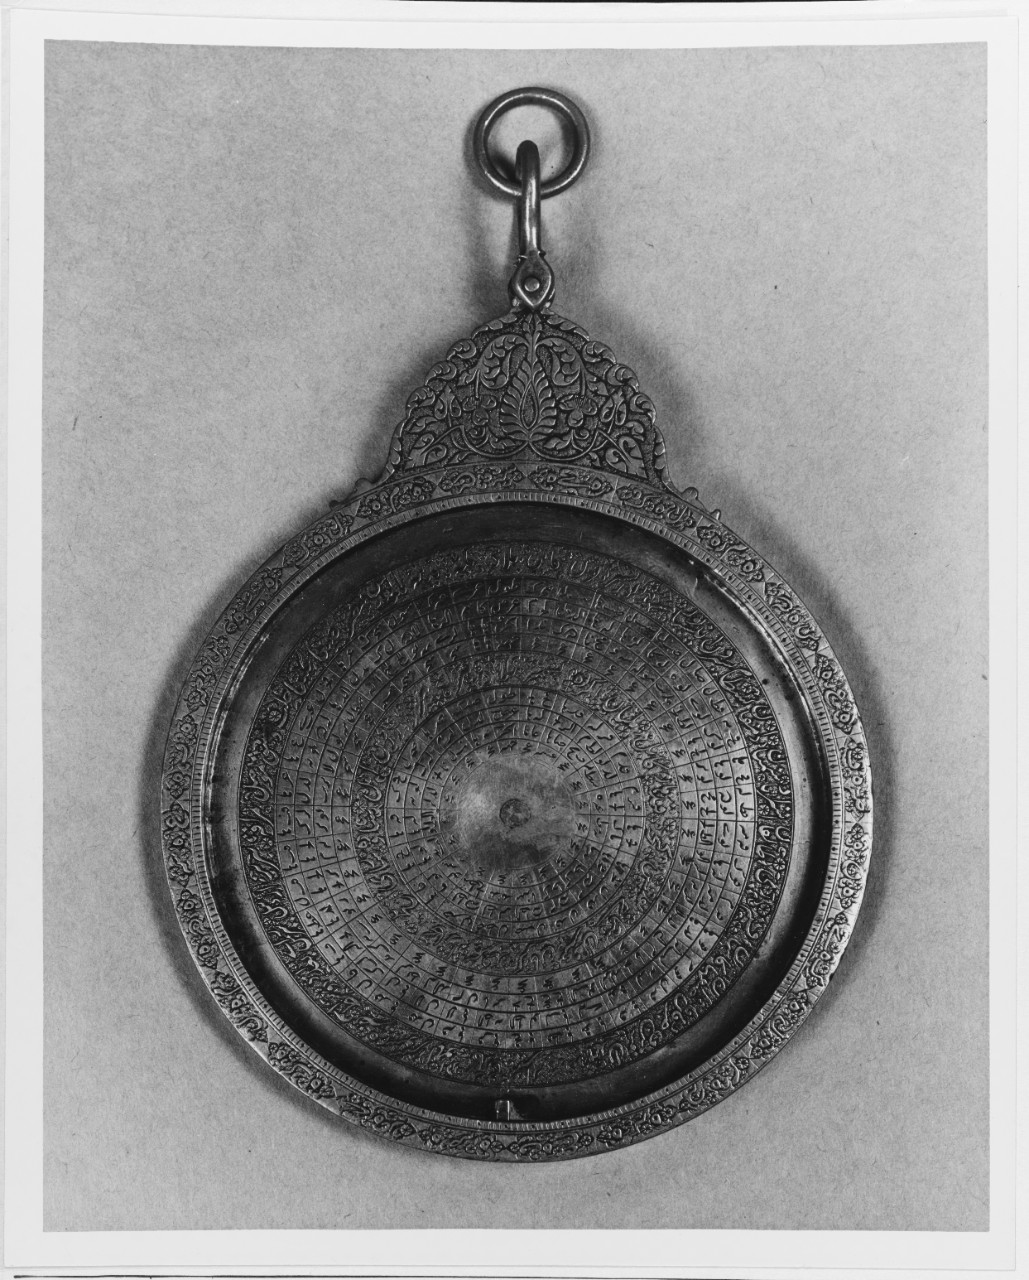 Front View of an Astrolabe